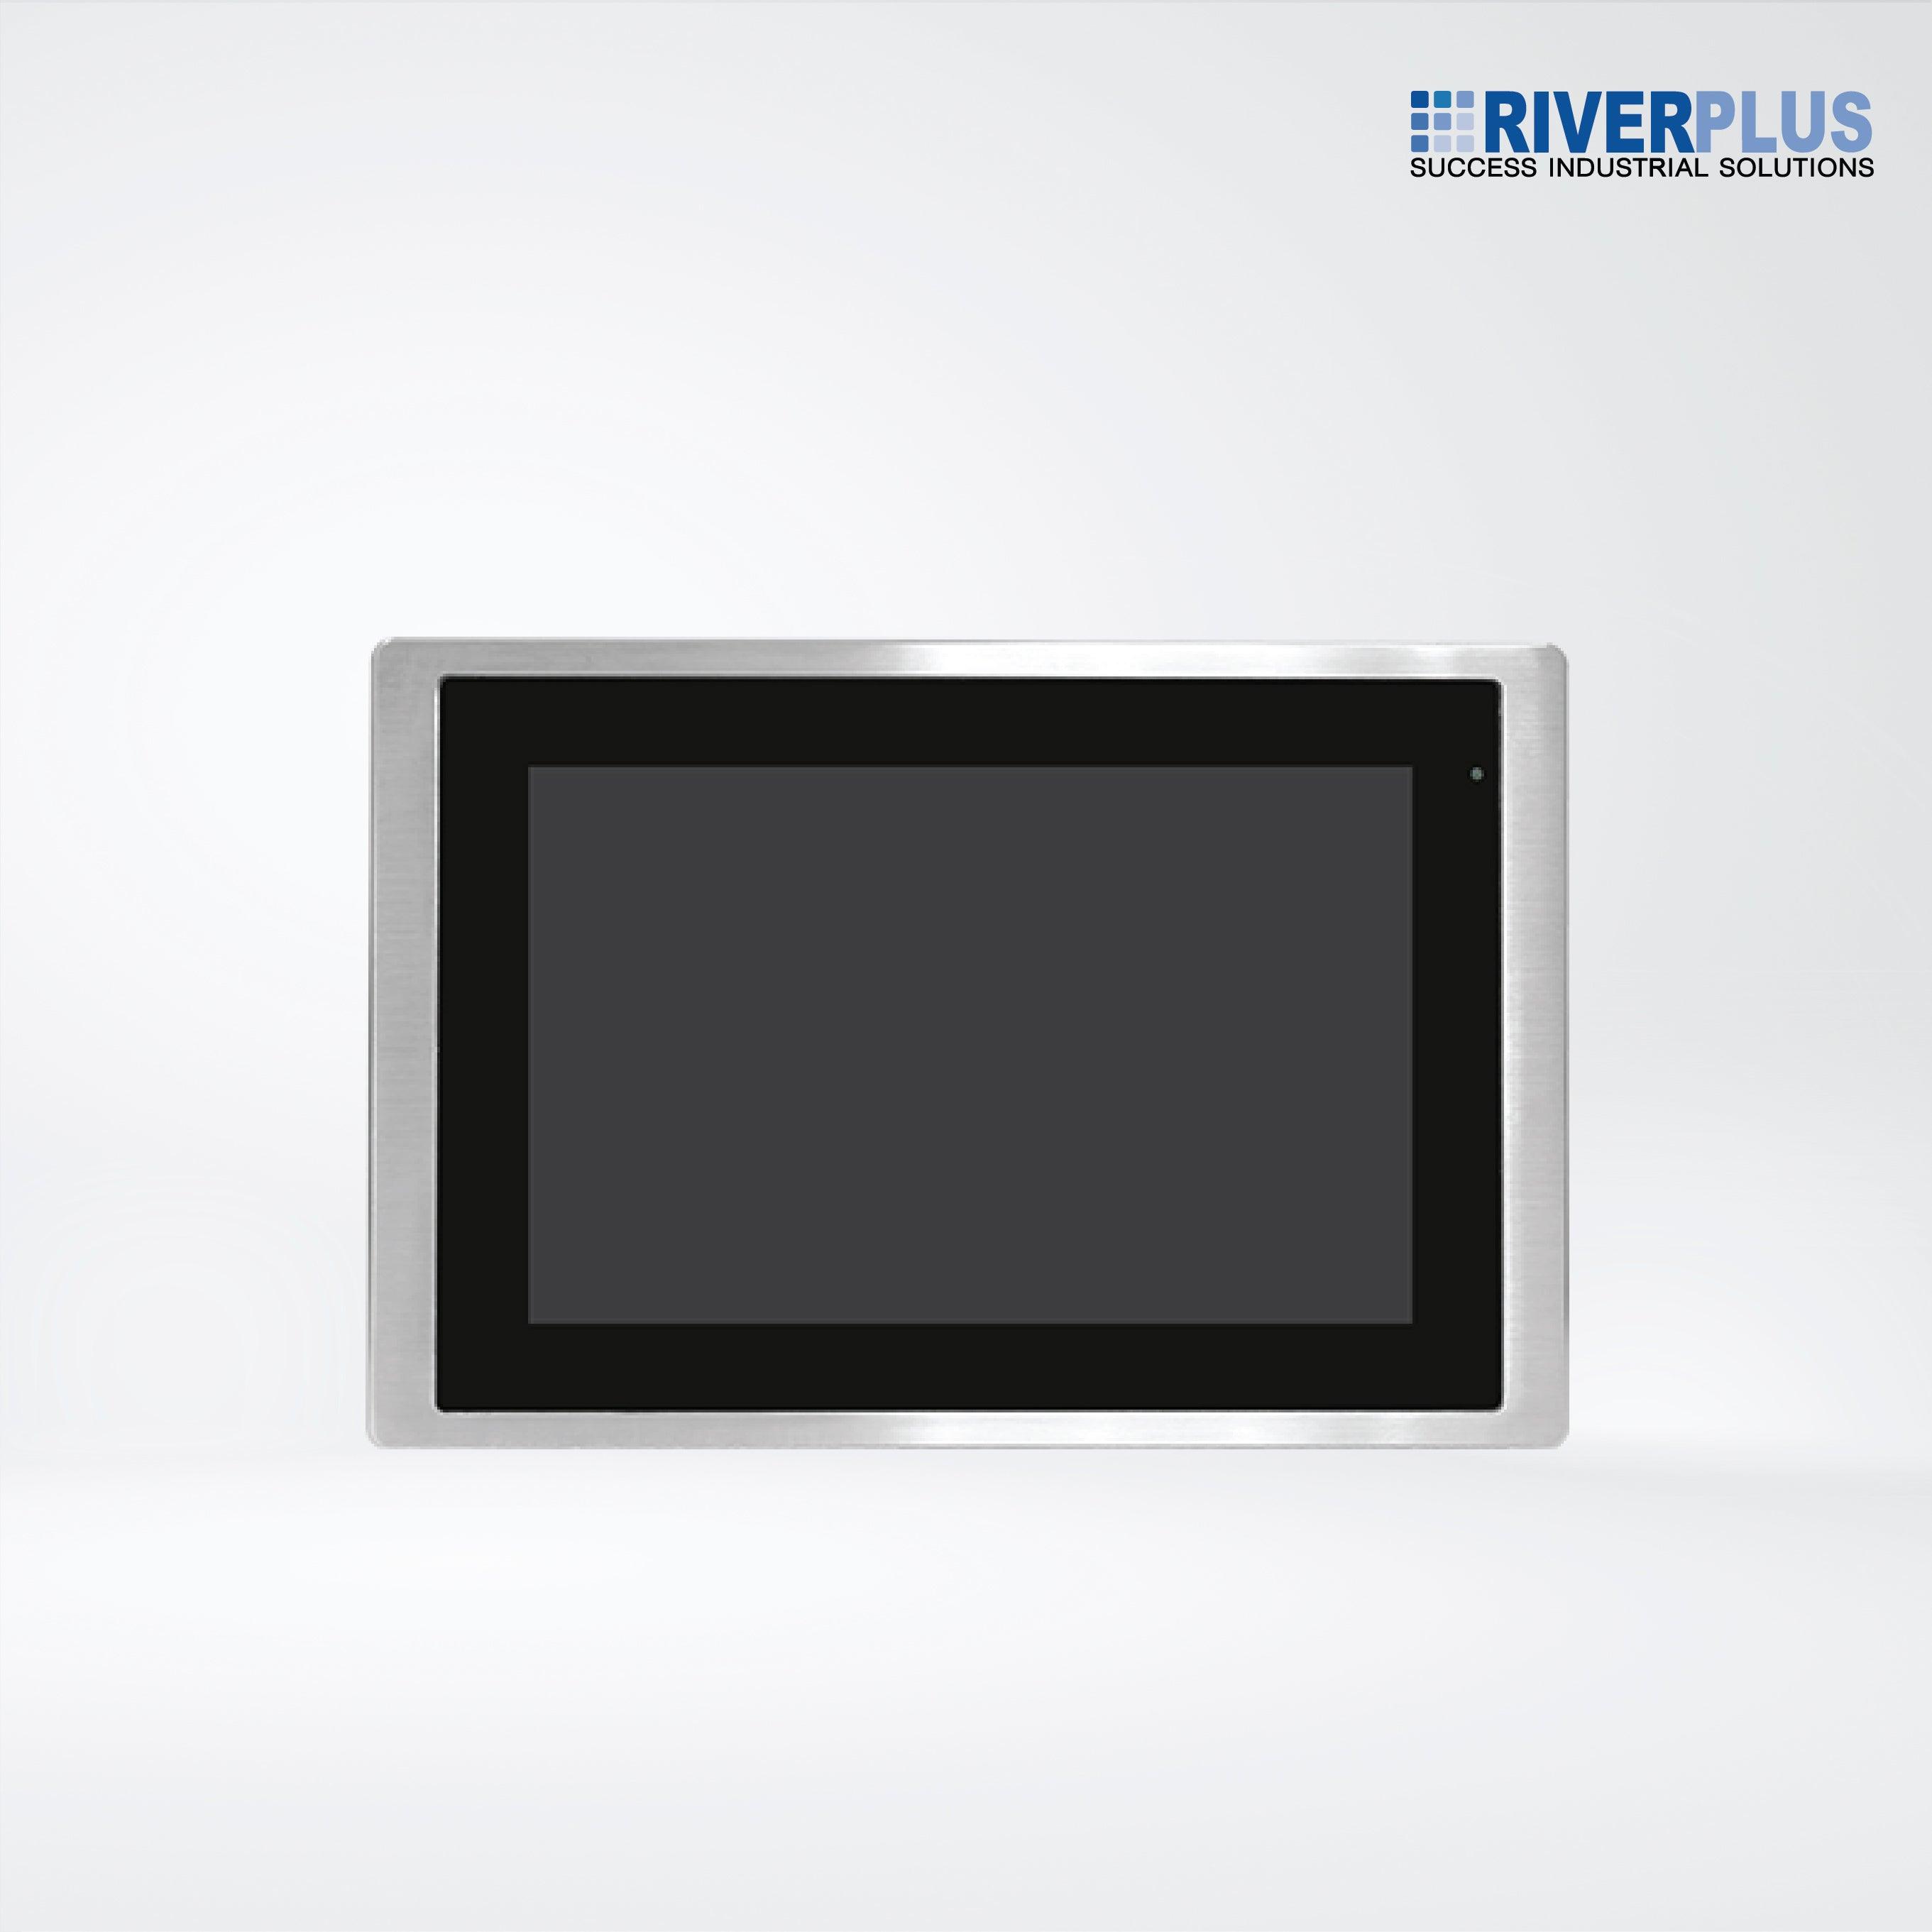 FABS-110P 10.1” Flat Front Panel IP66 Stainless Chassis Display - Riverplus